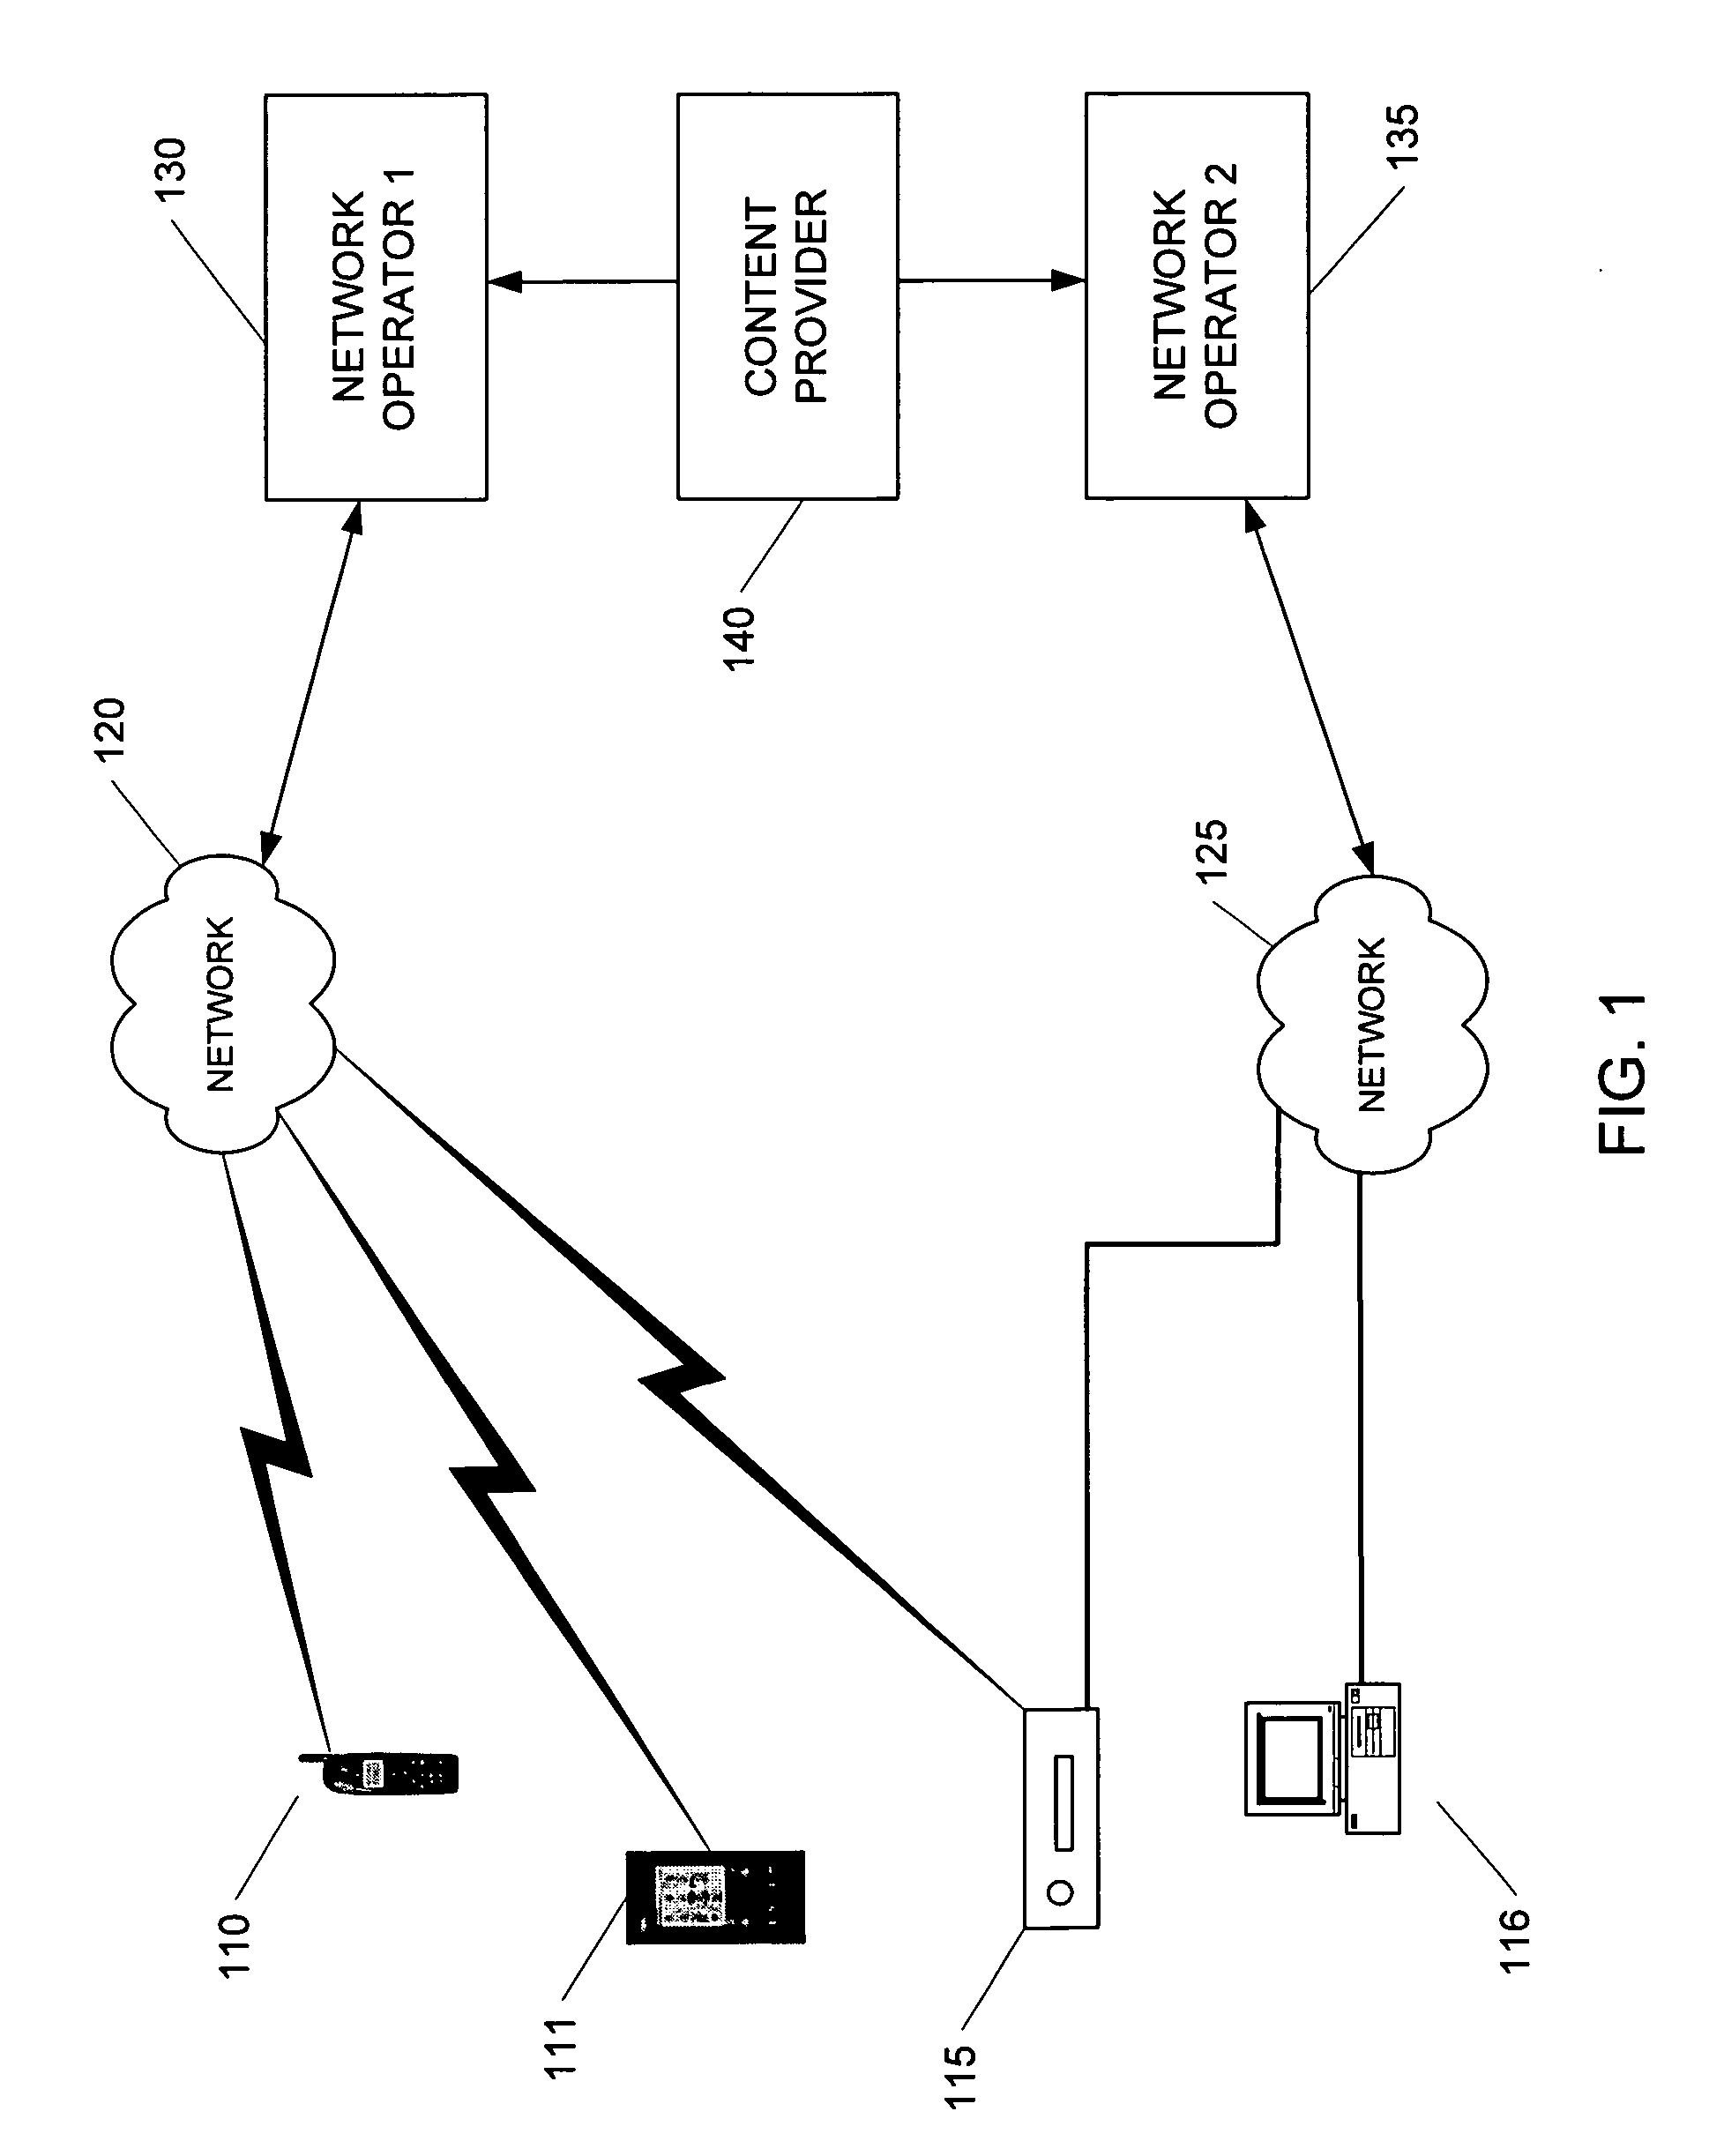 Combined receiver for DVB-H and DVB-T transmission